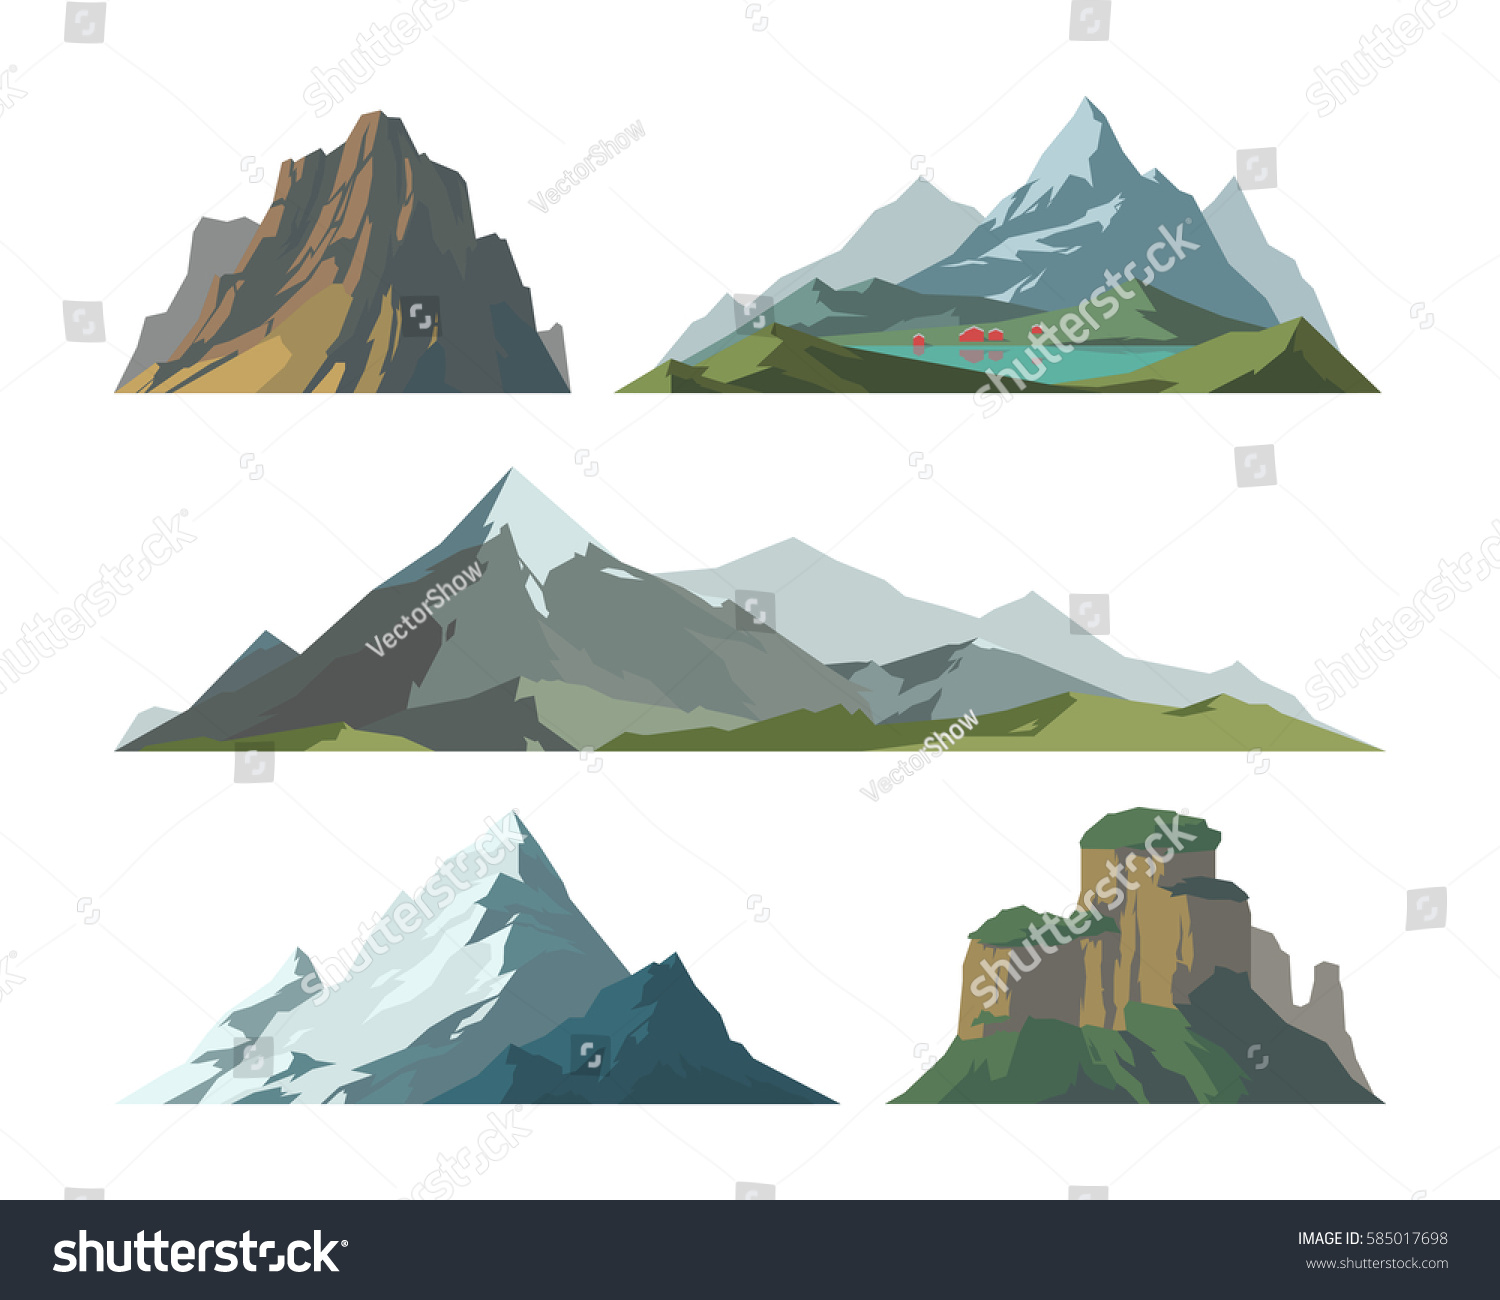 Mountain vector illustration landscape mature silhouette element outdoor icon snow ice tops and decorative isolated camping travel climbing or hiking mountainous geology